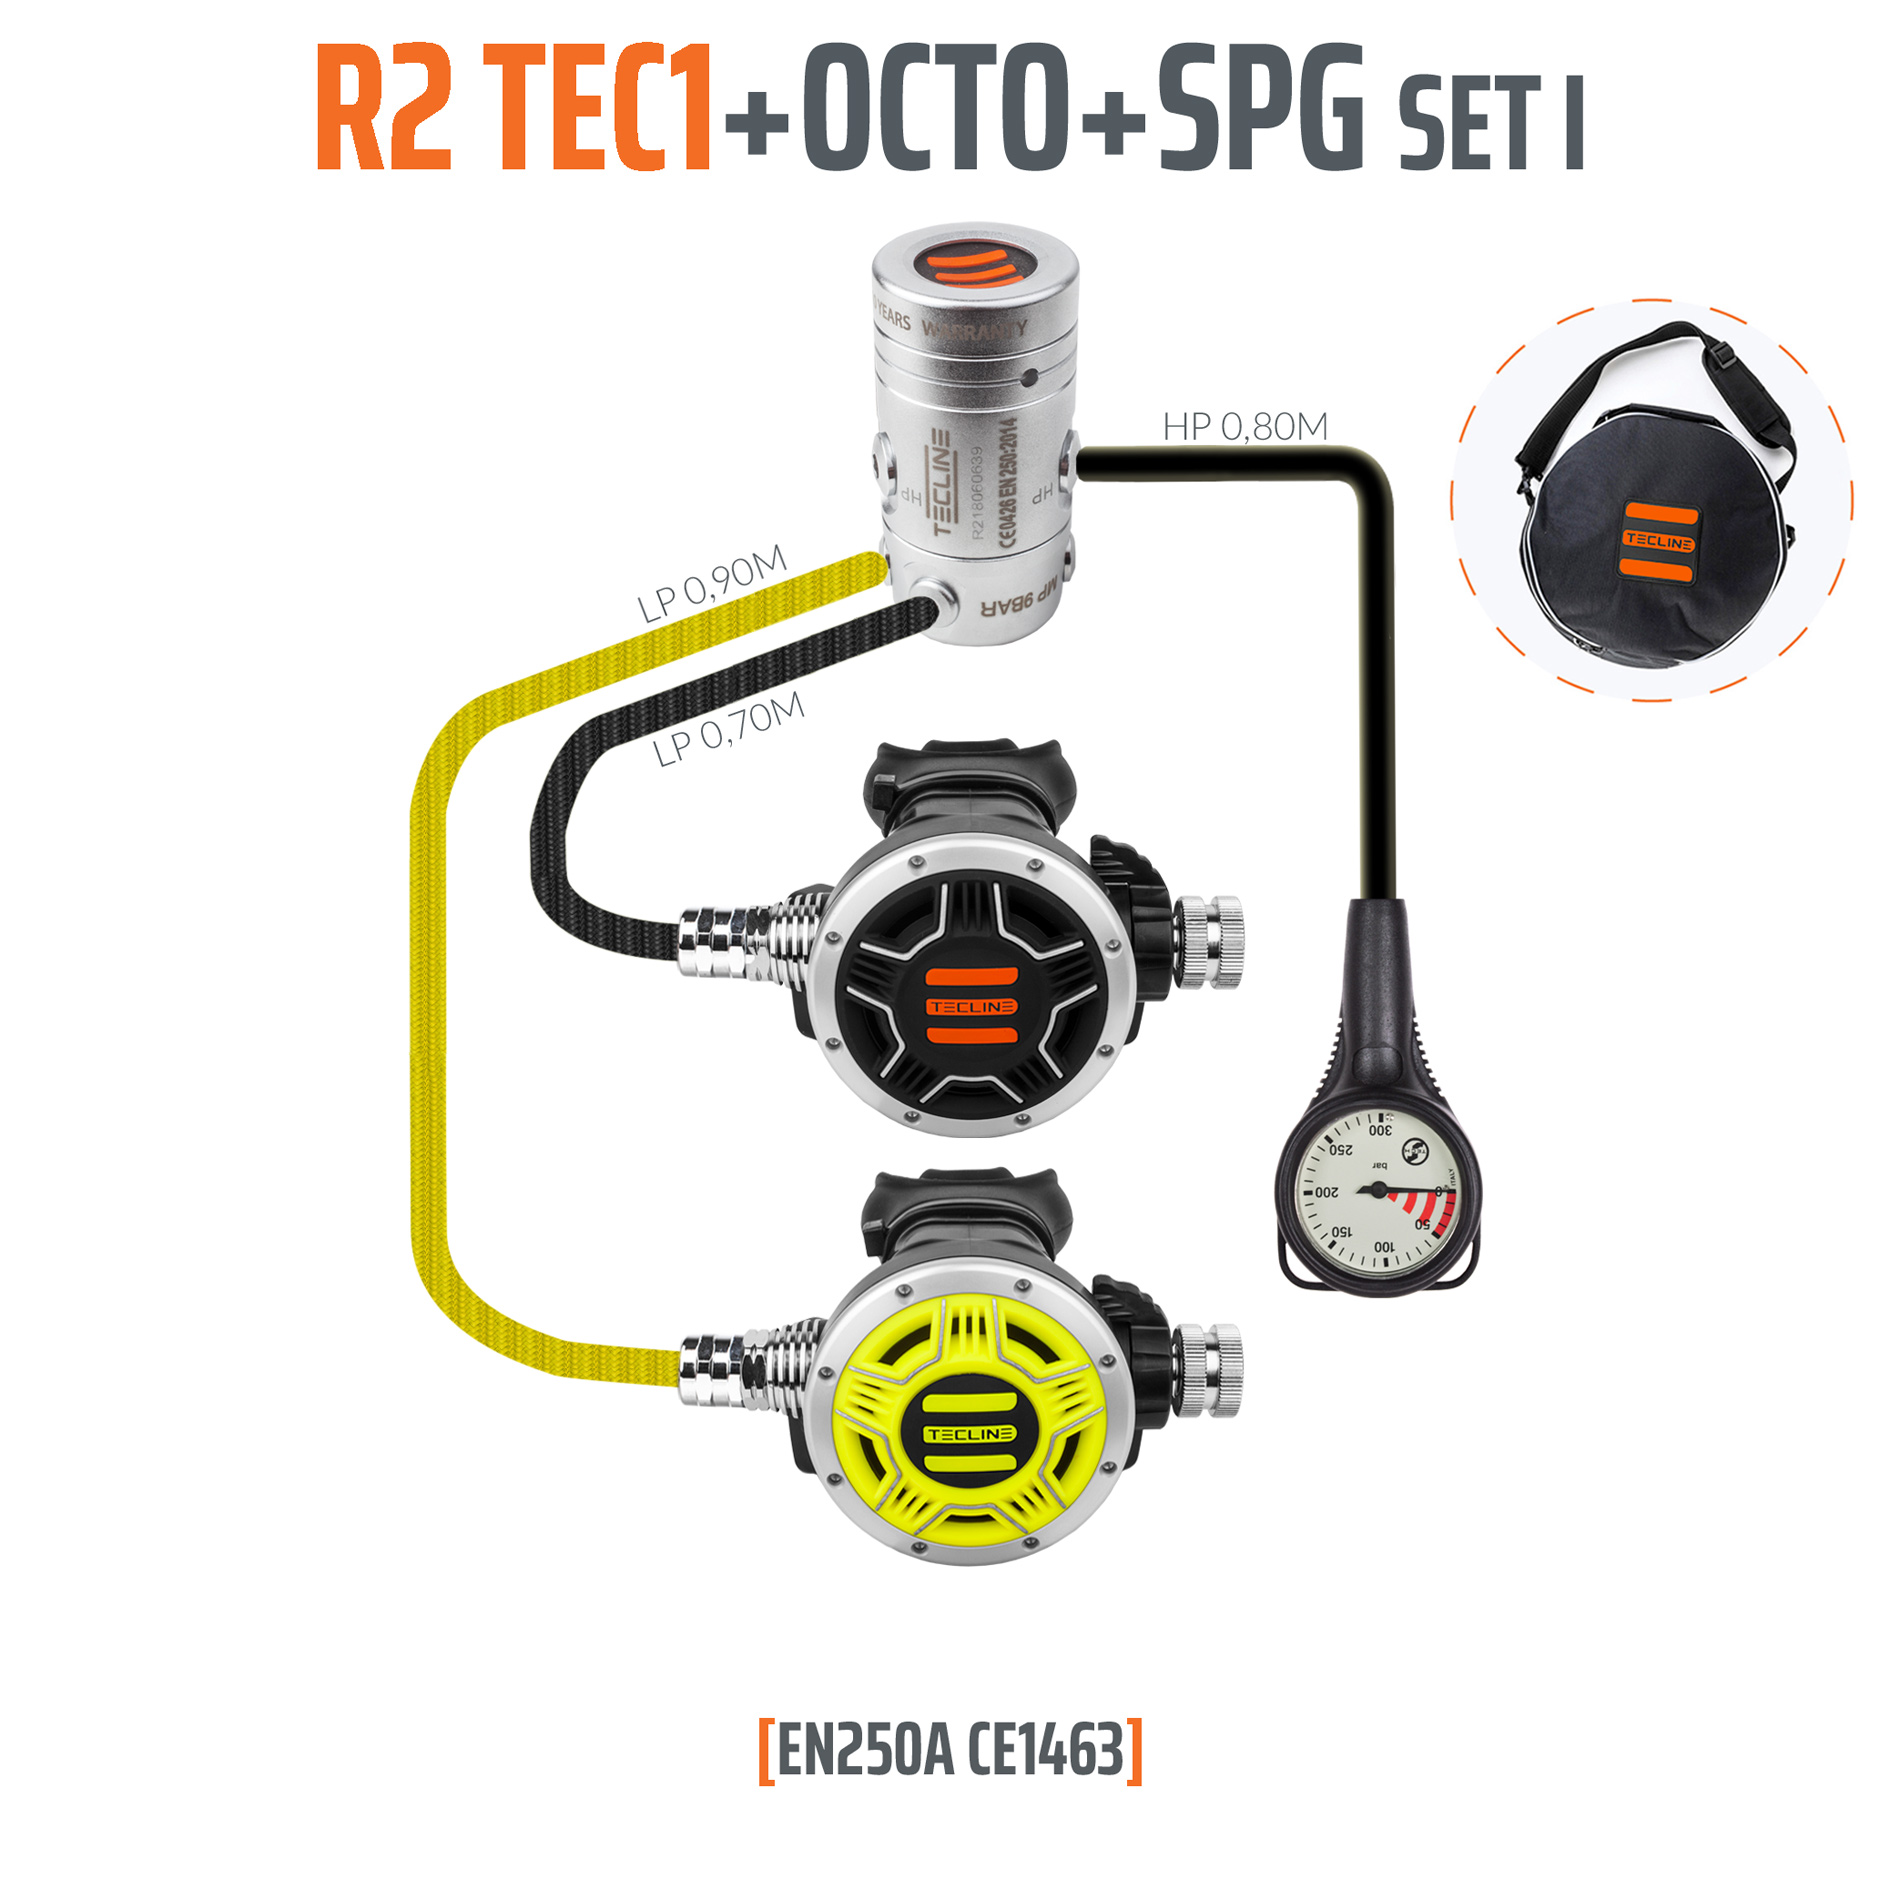 Tecline Regulator R2 TEC1 set I with octo and SPG – EN250A